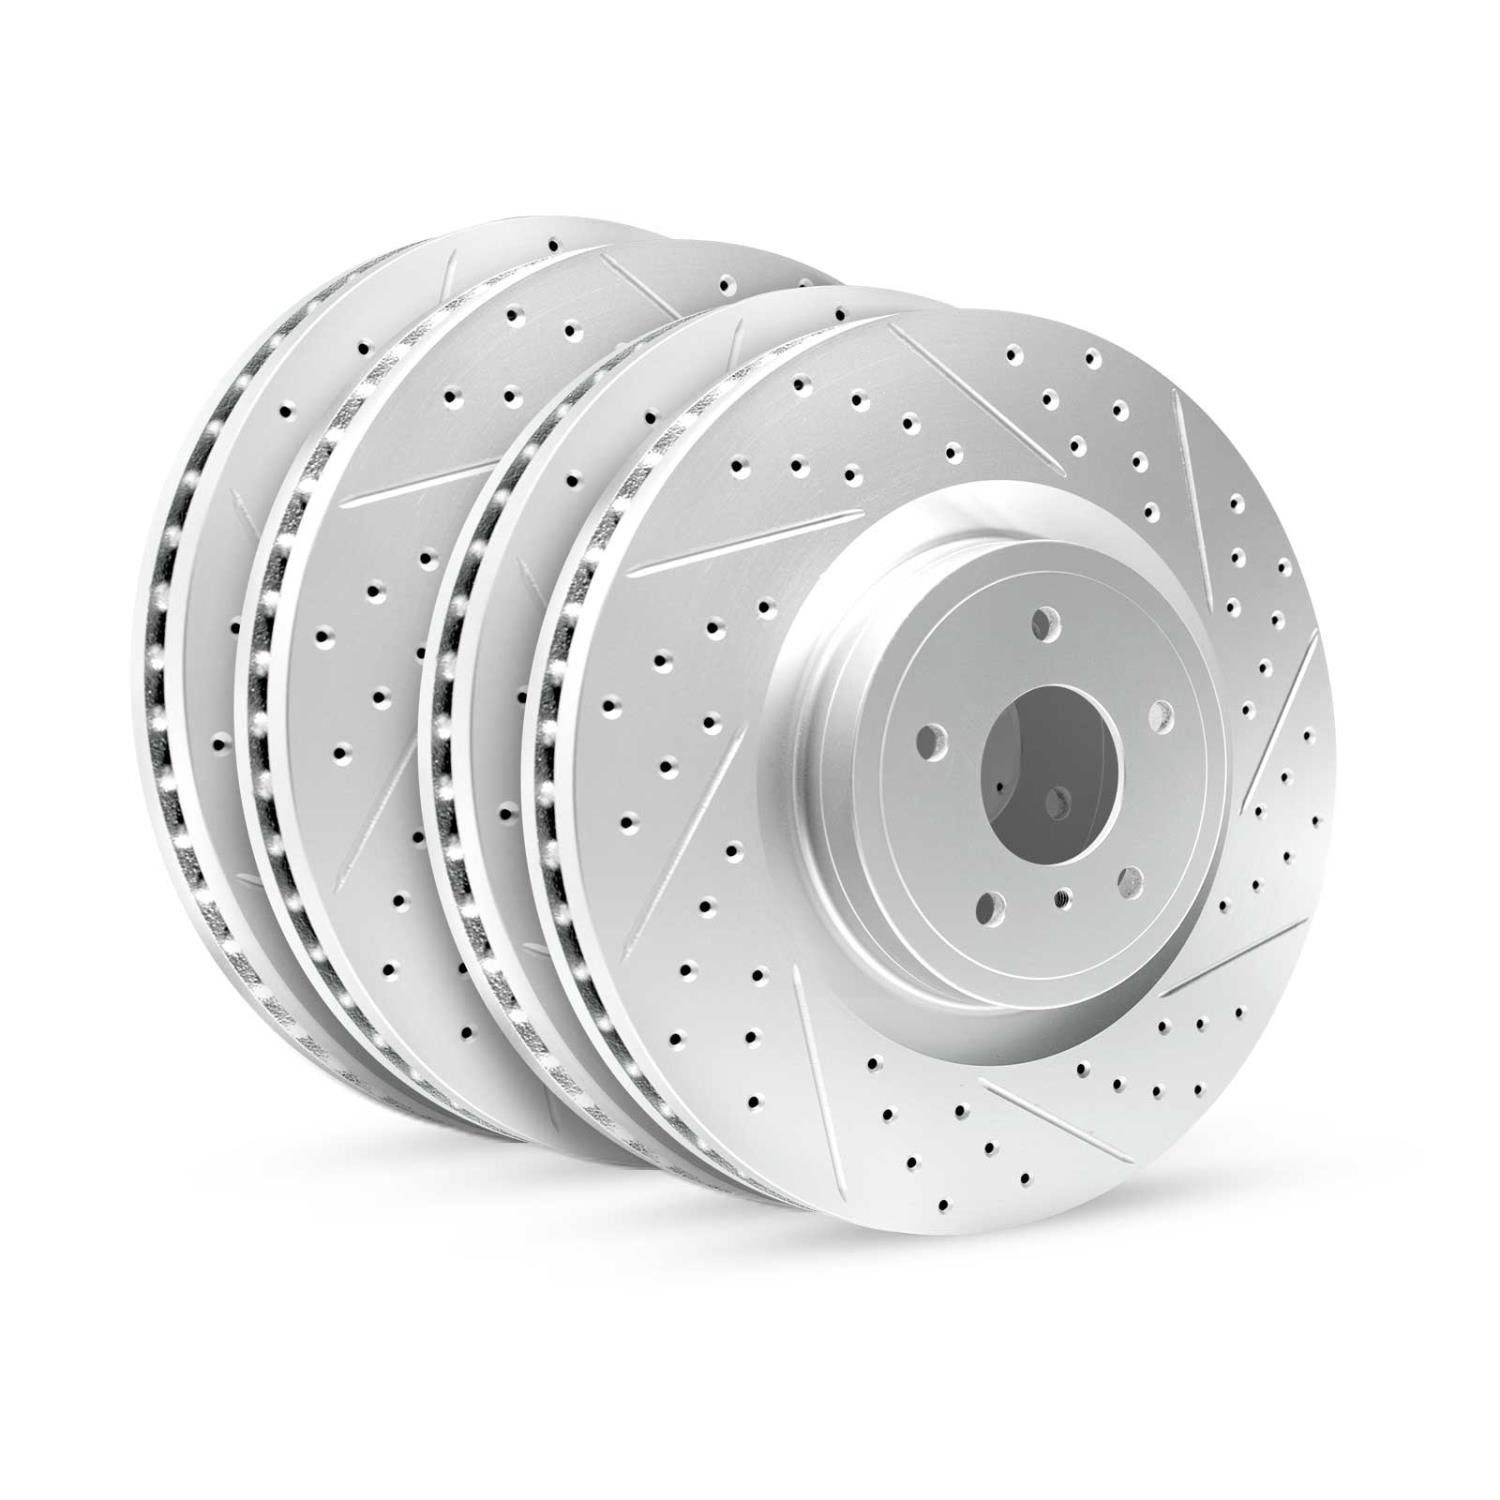 GEO-Carbon Drilled/Slotted Rotors, 2016-2019 Land Rover,